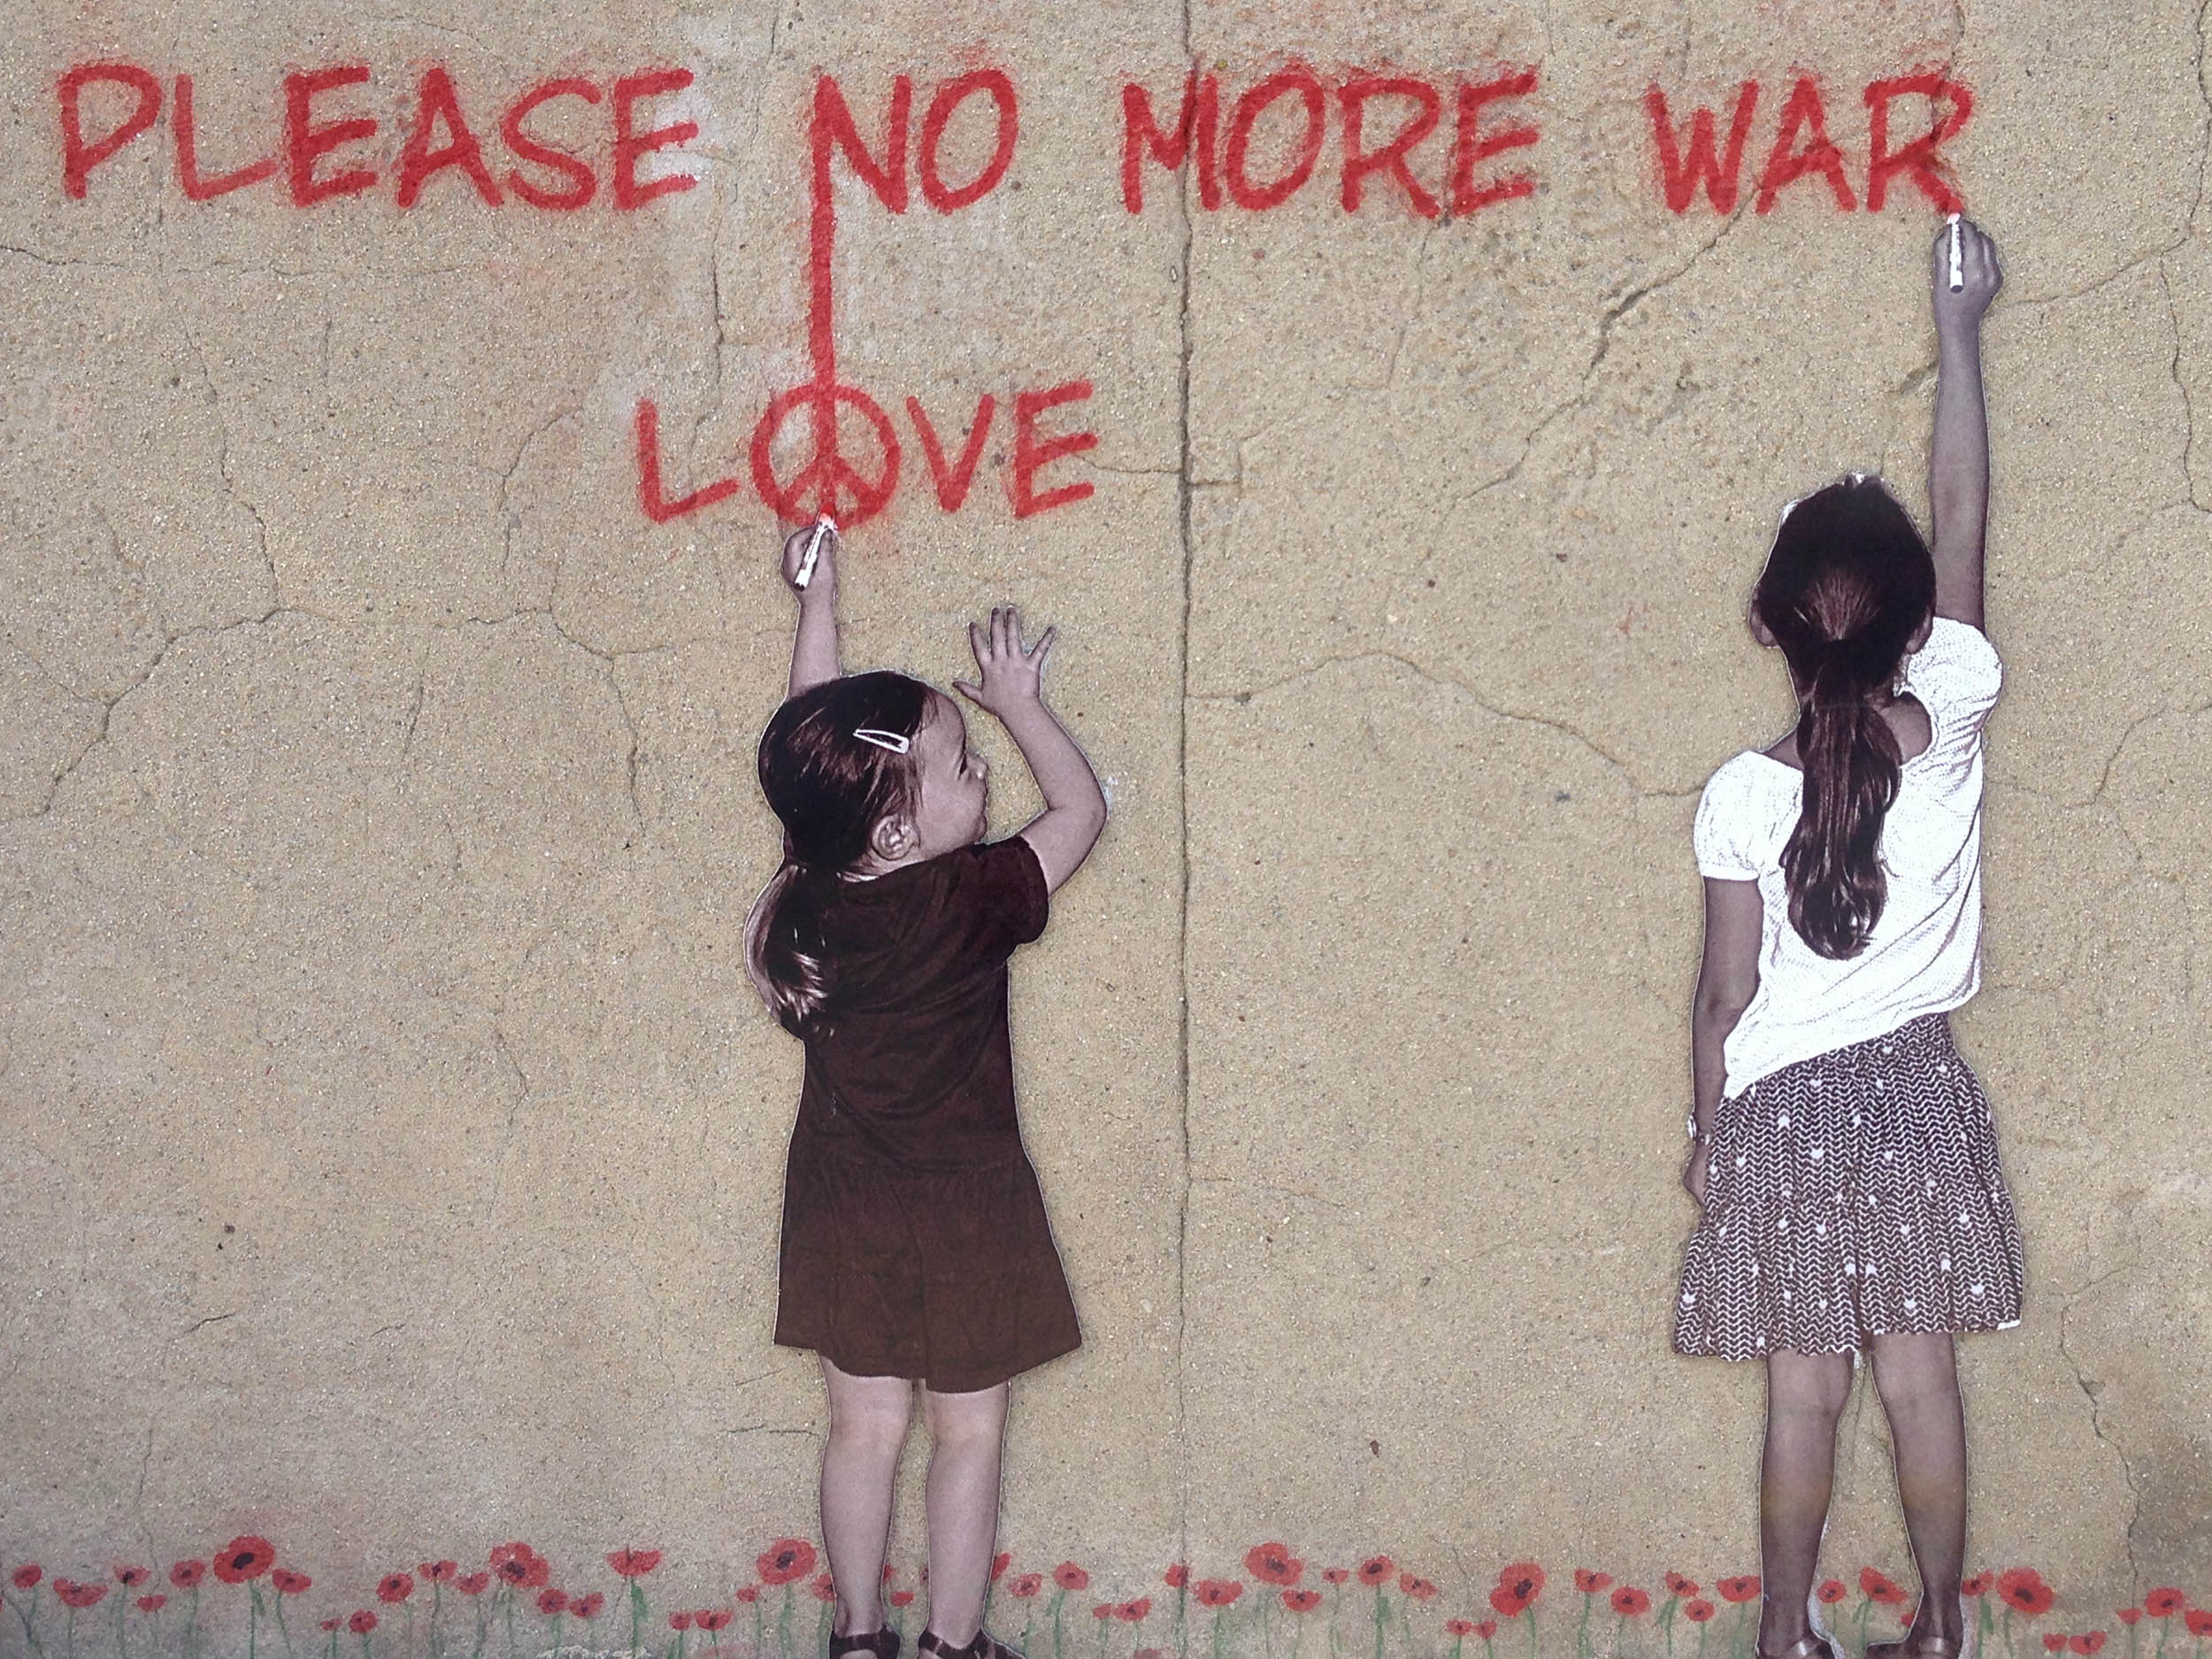 mural of two girls writing 'Please no more war' and 'Love' (link to file)